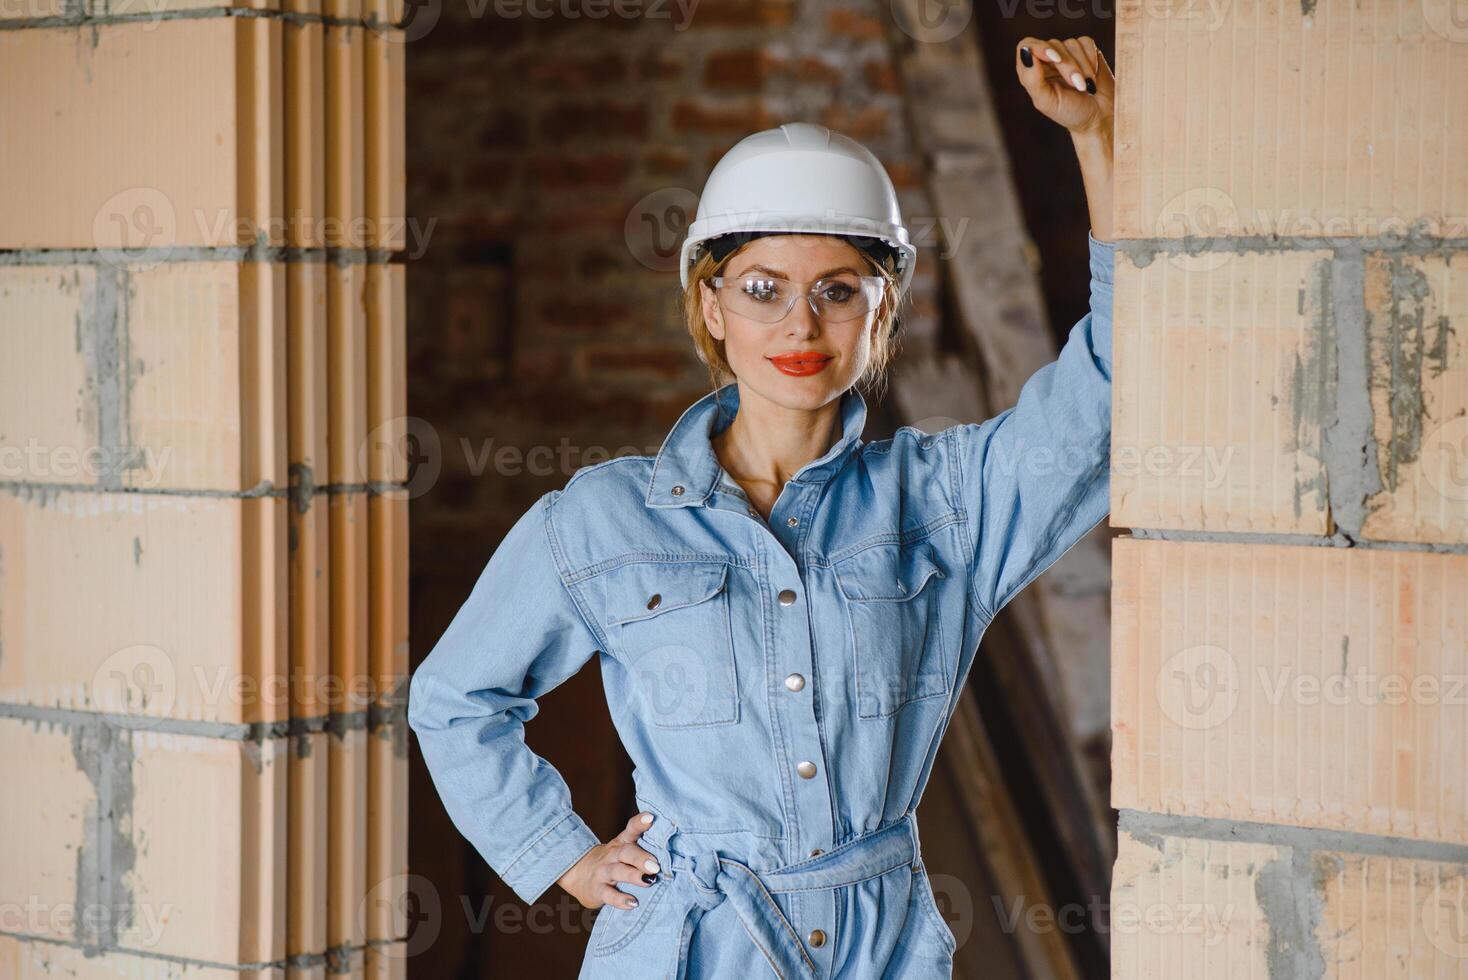 Warehouse woman worker. Woman builder in hardhat. Girl engineer or architect. Home renovation. Quality inspector. Construction job occupation. Construction worker. Lady at construction site photo